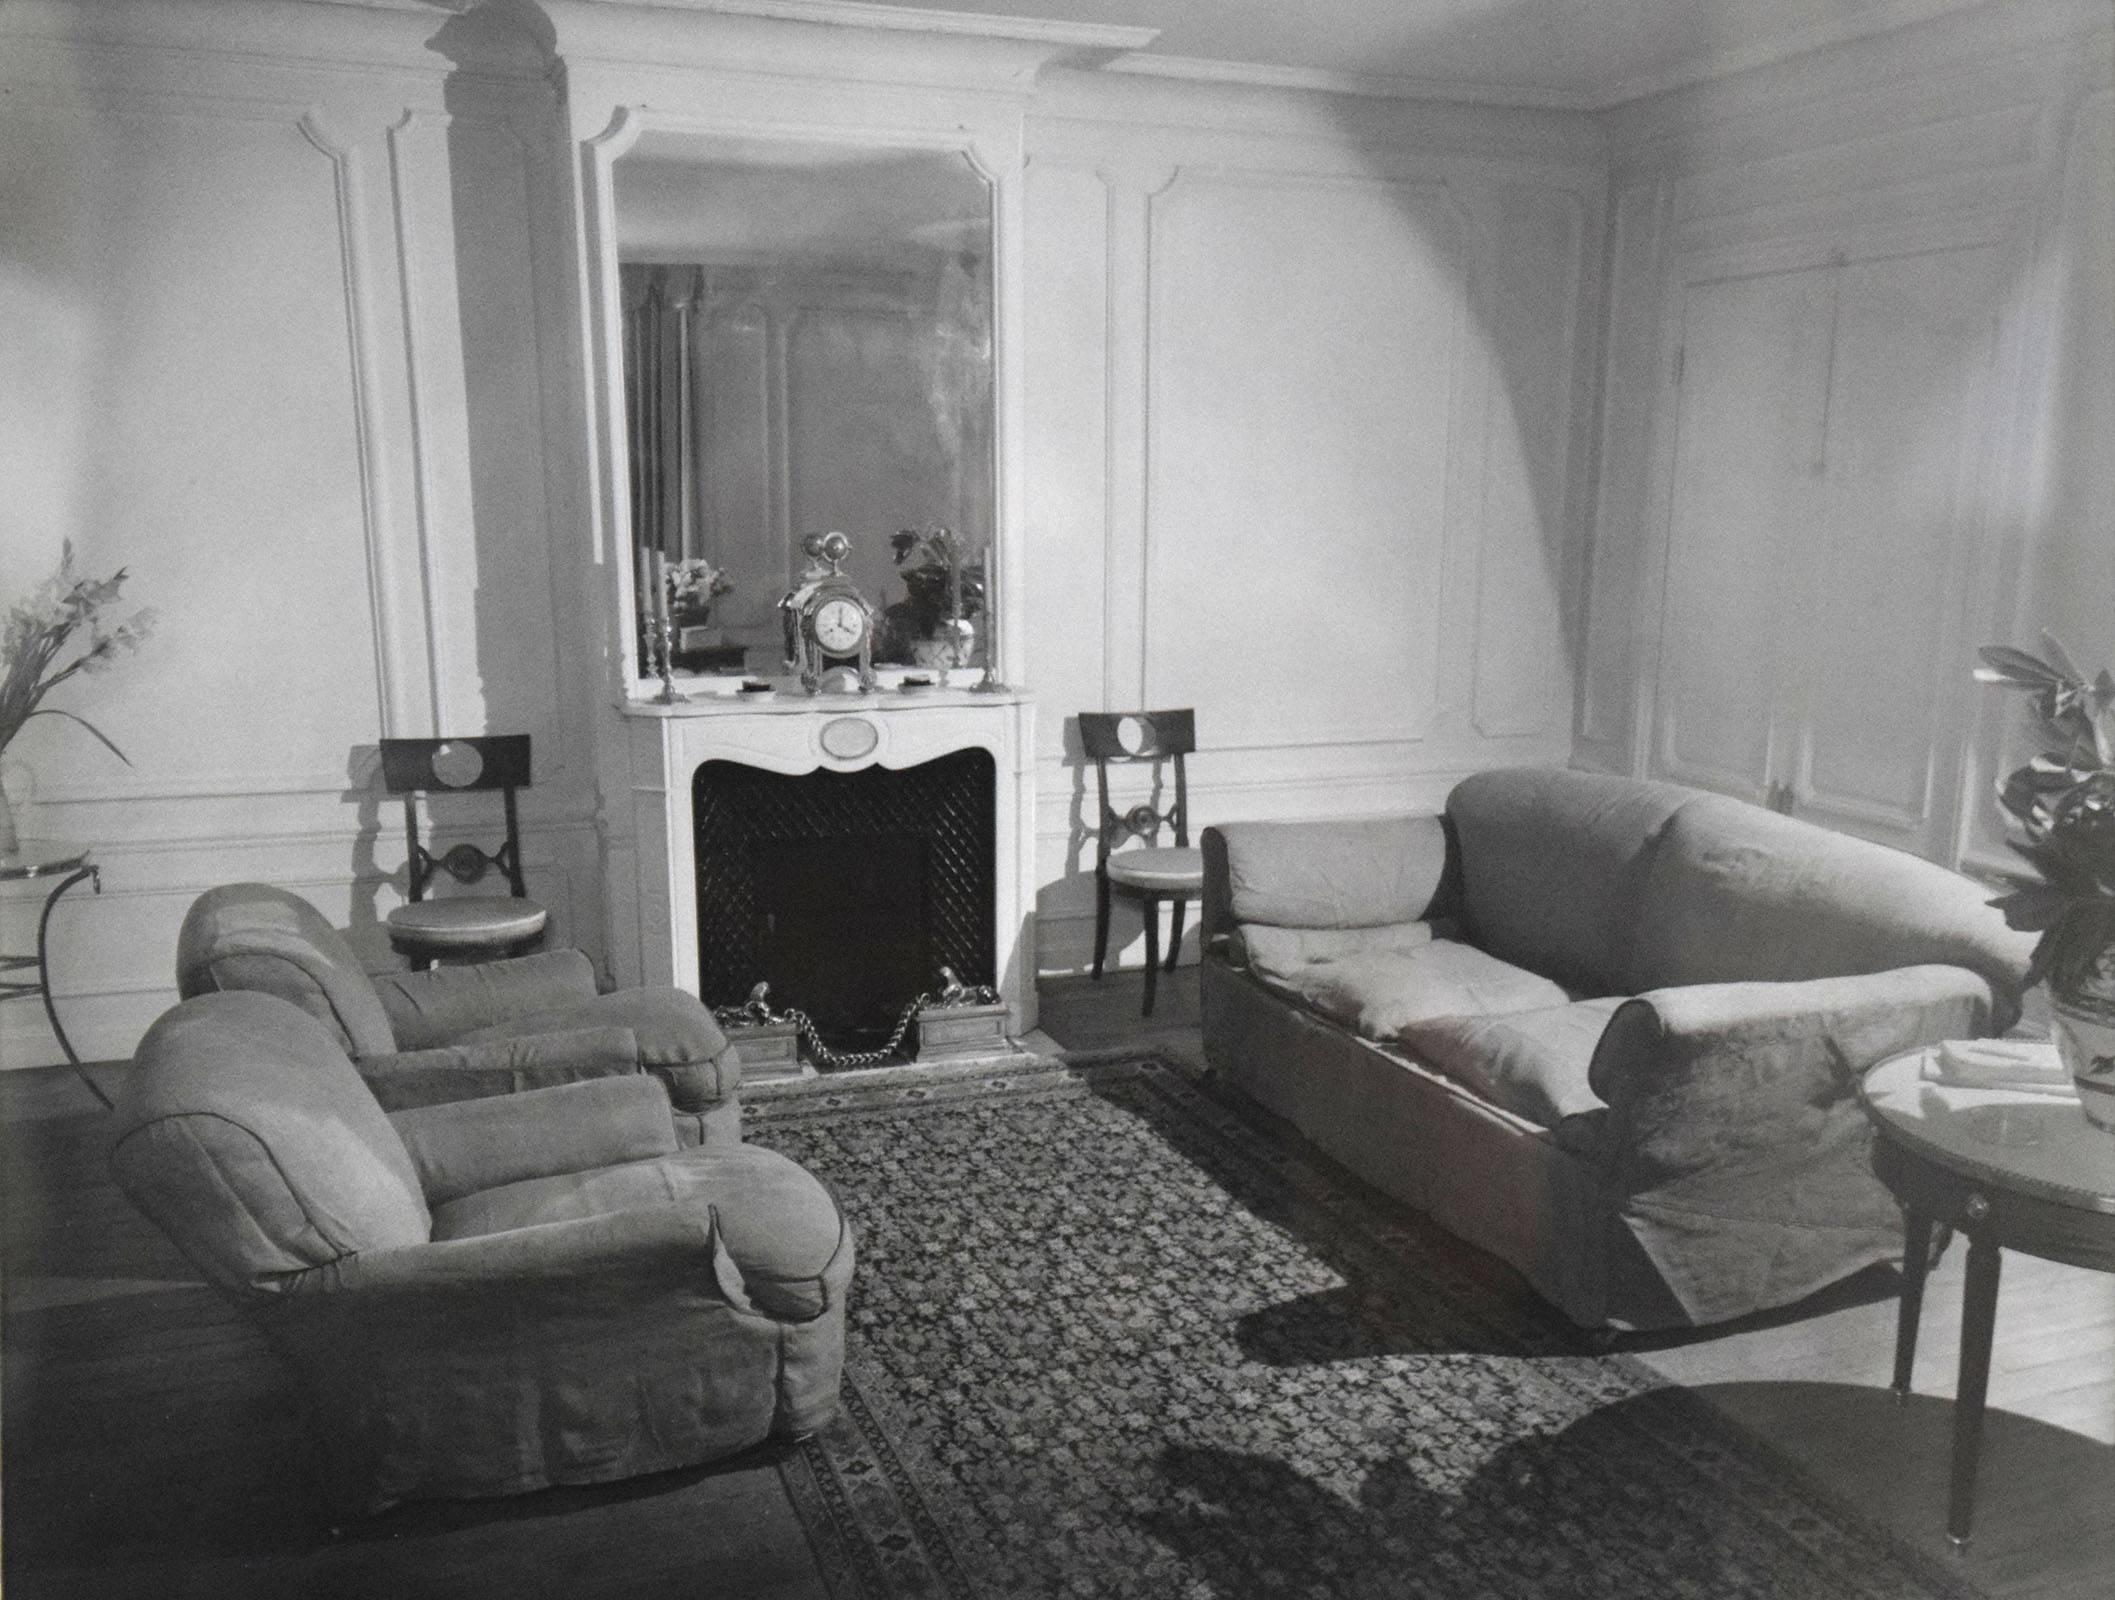 The decorator Jean-Michel Frank helped Eugenia Errazuriz -- "Madame Minimalism" -- decorate her Paris house, and supplied the Giacometti lamp and upholstered furniture. Celebrated for her style, Errazuriz was dressed exclusively by Chanel.